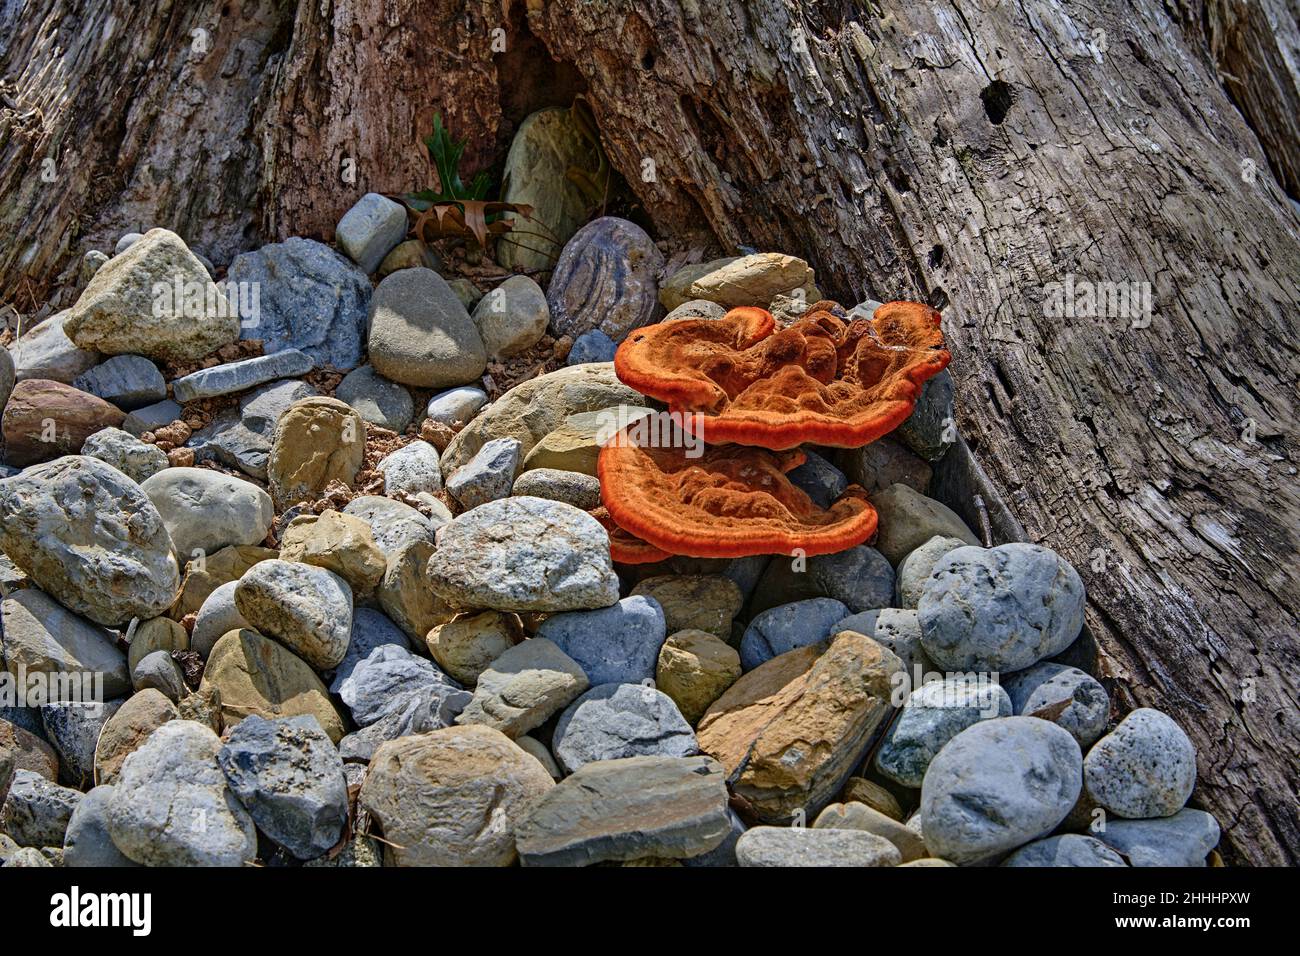 A close up of an orange mushroom nestled in a rock garden by a stump. A white-rot decomposer. It is inedible,poisonous. Stock Photo